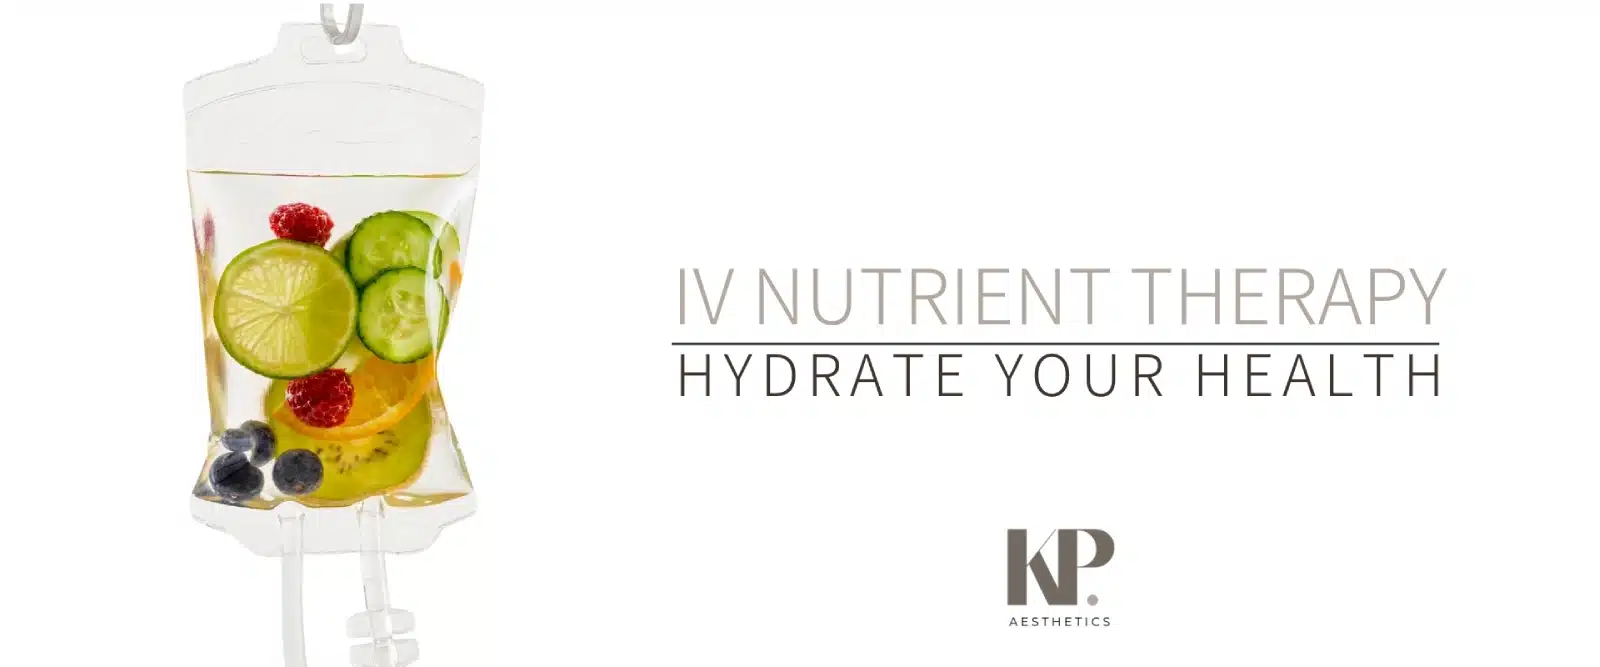 IV Nutrient Therapy - Hydrate Your Health - KP Aesthetics